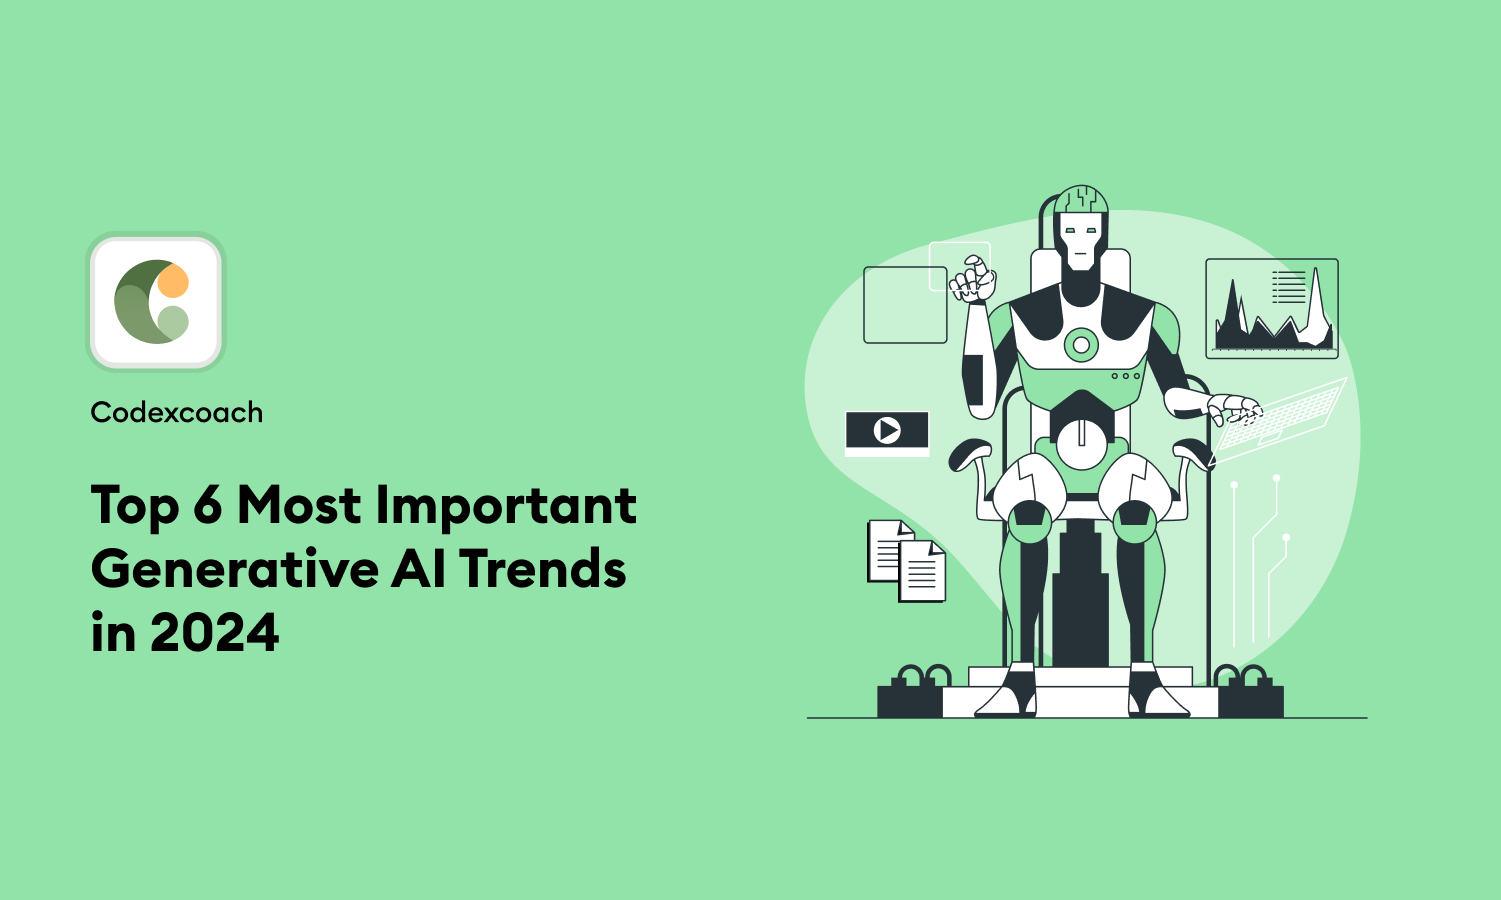 Top 6 Most Important Generative AI Trends in 2024